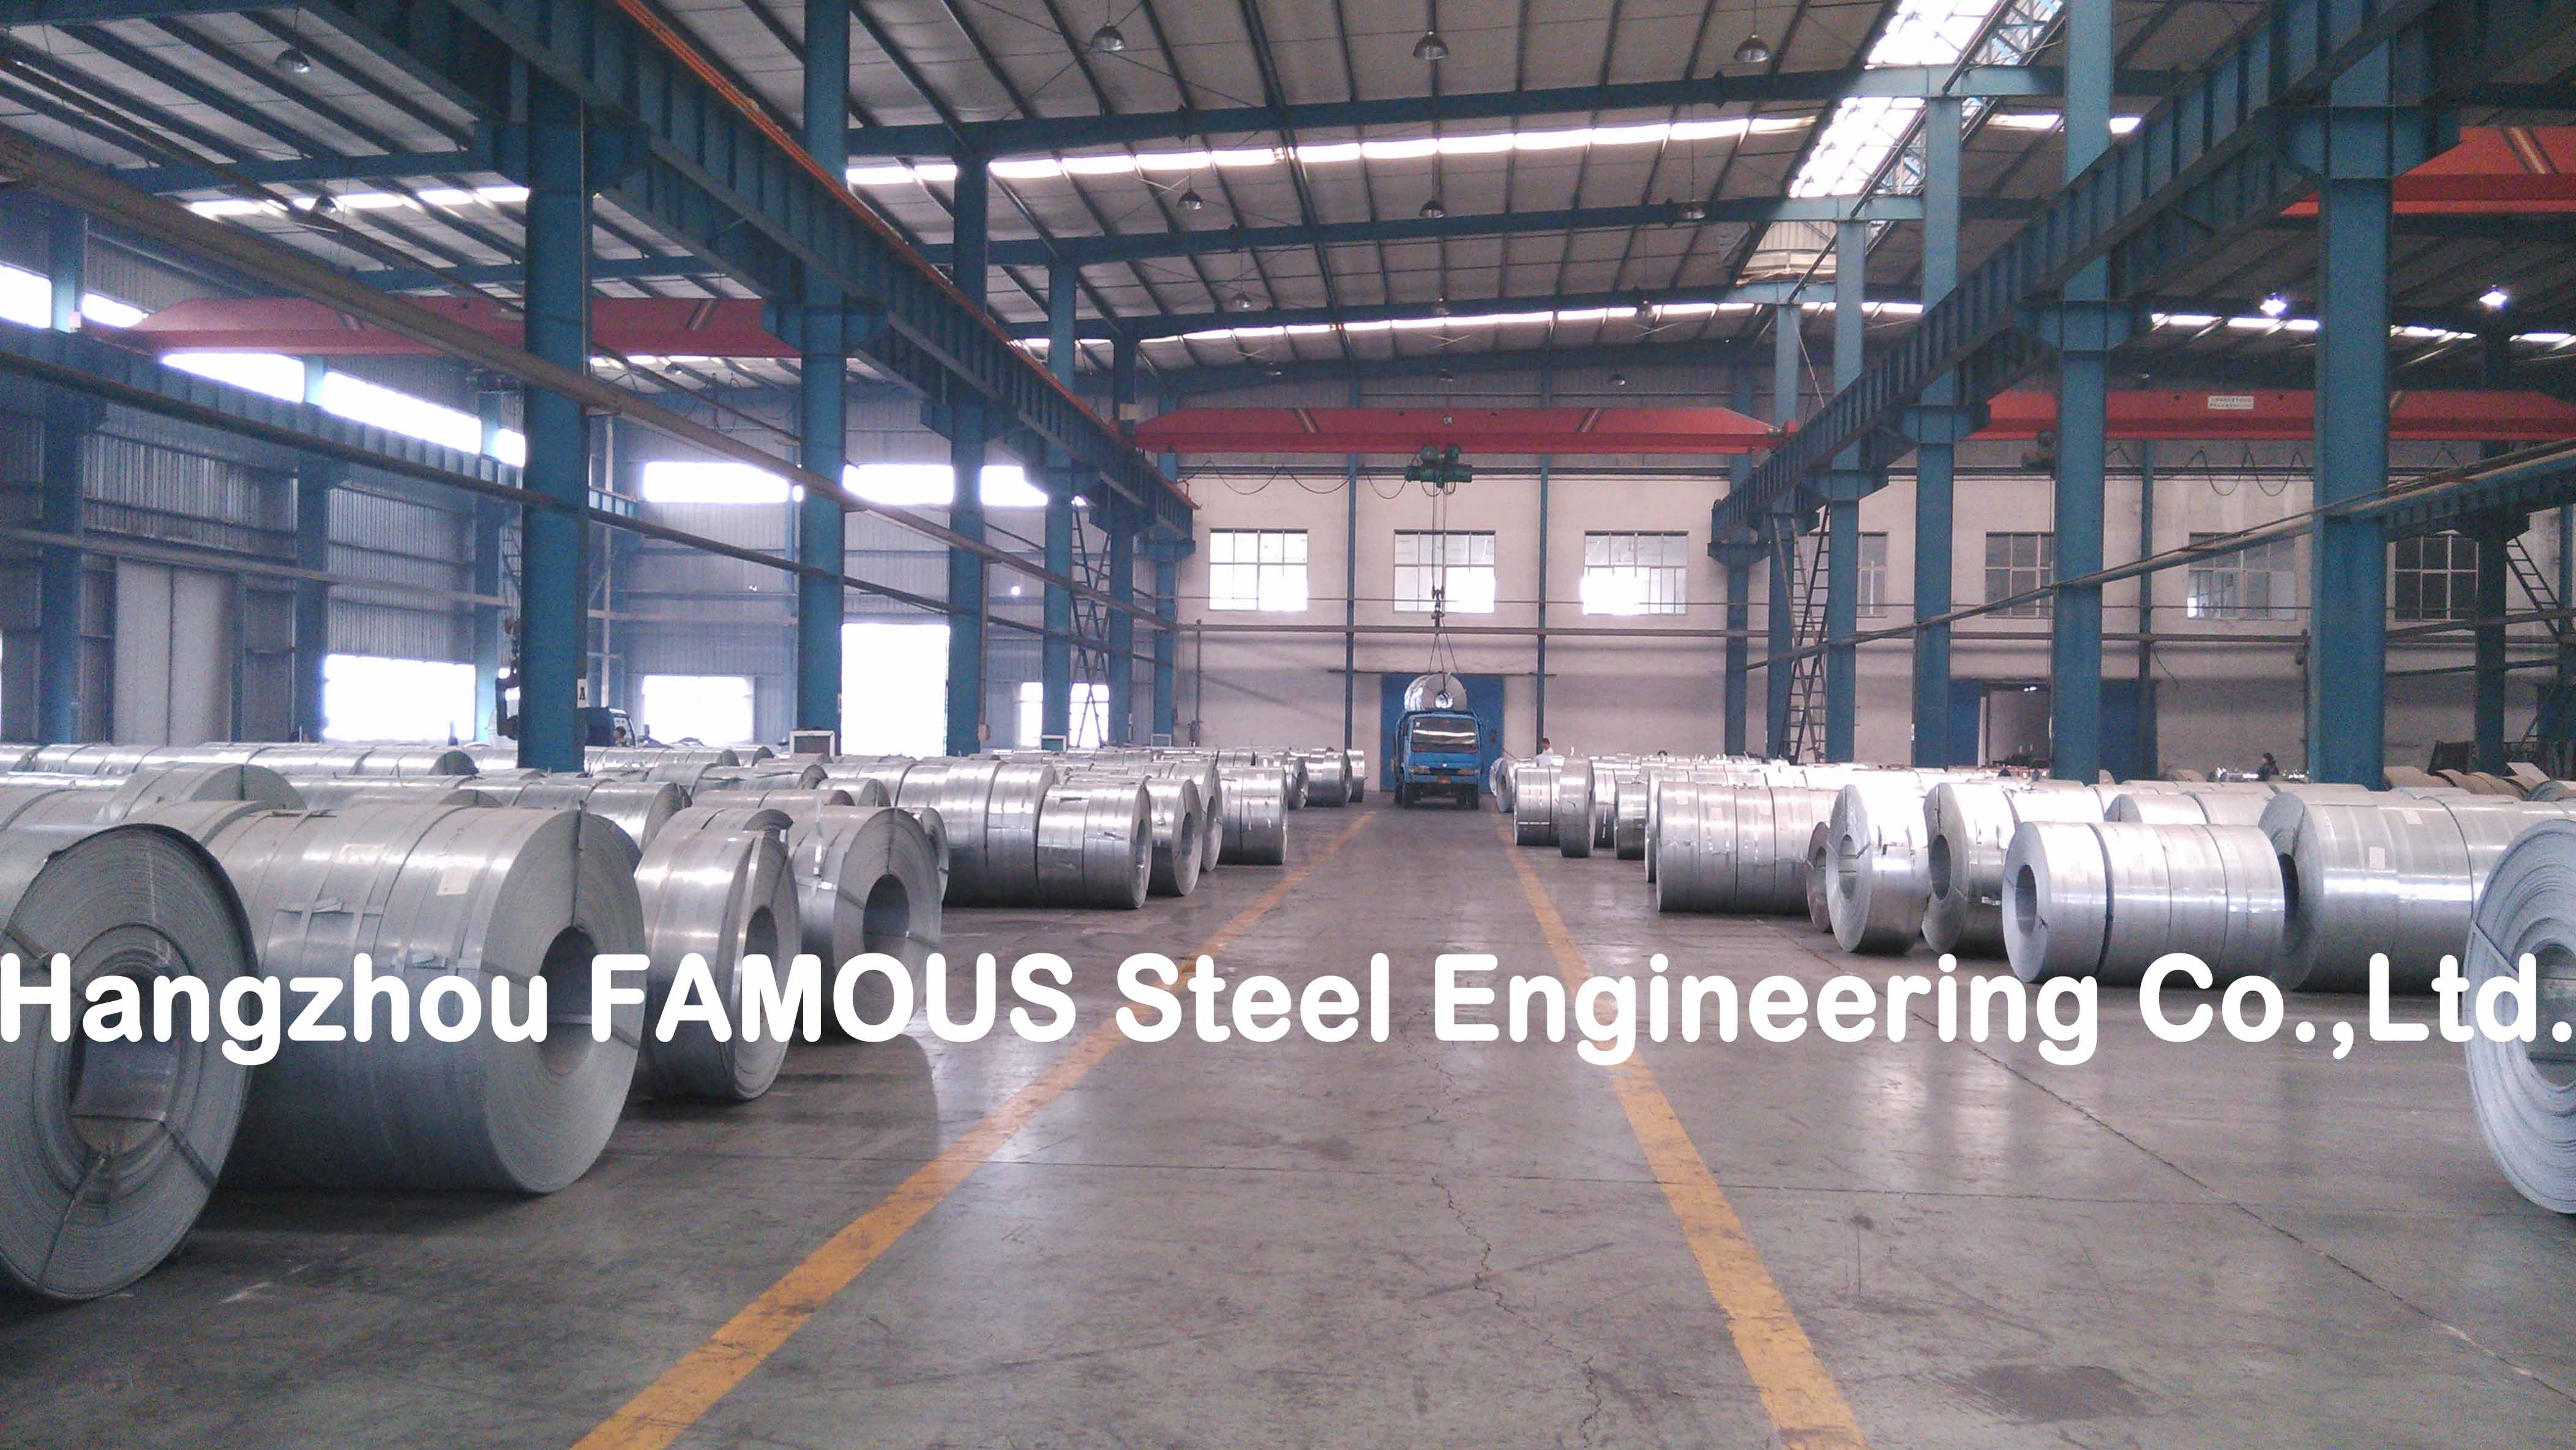 Cold Rolled Hot Dipped Galvanized Steel Strip Galvanized Steel Coil 600mm - 1500mm Width